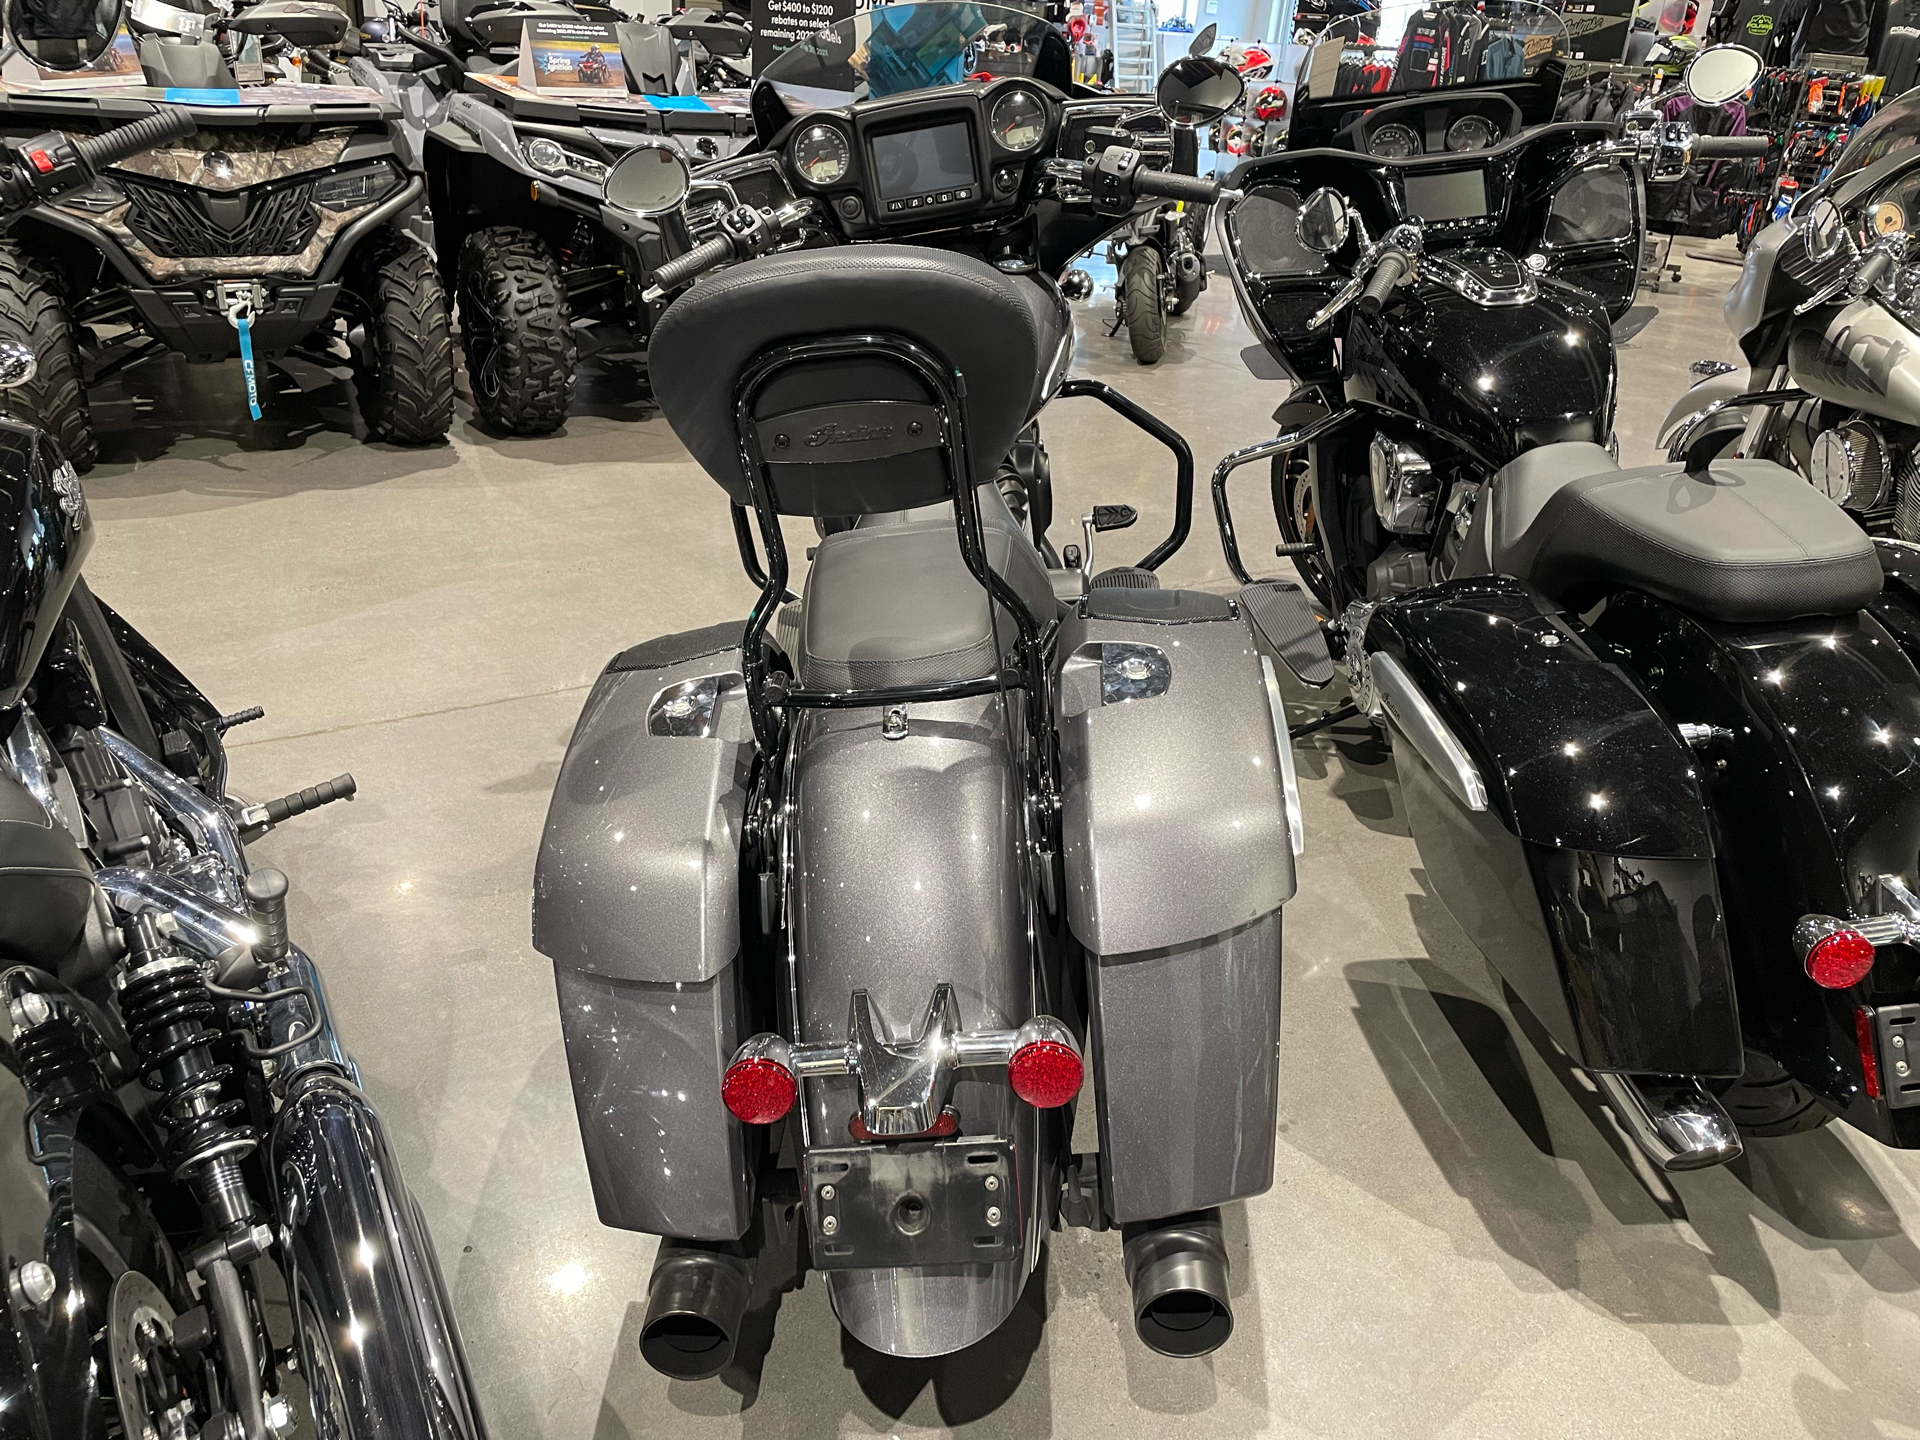 2019 Indian Motorcycle Chieftain® ABS in Farmington, New York - Photo 3